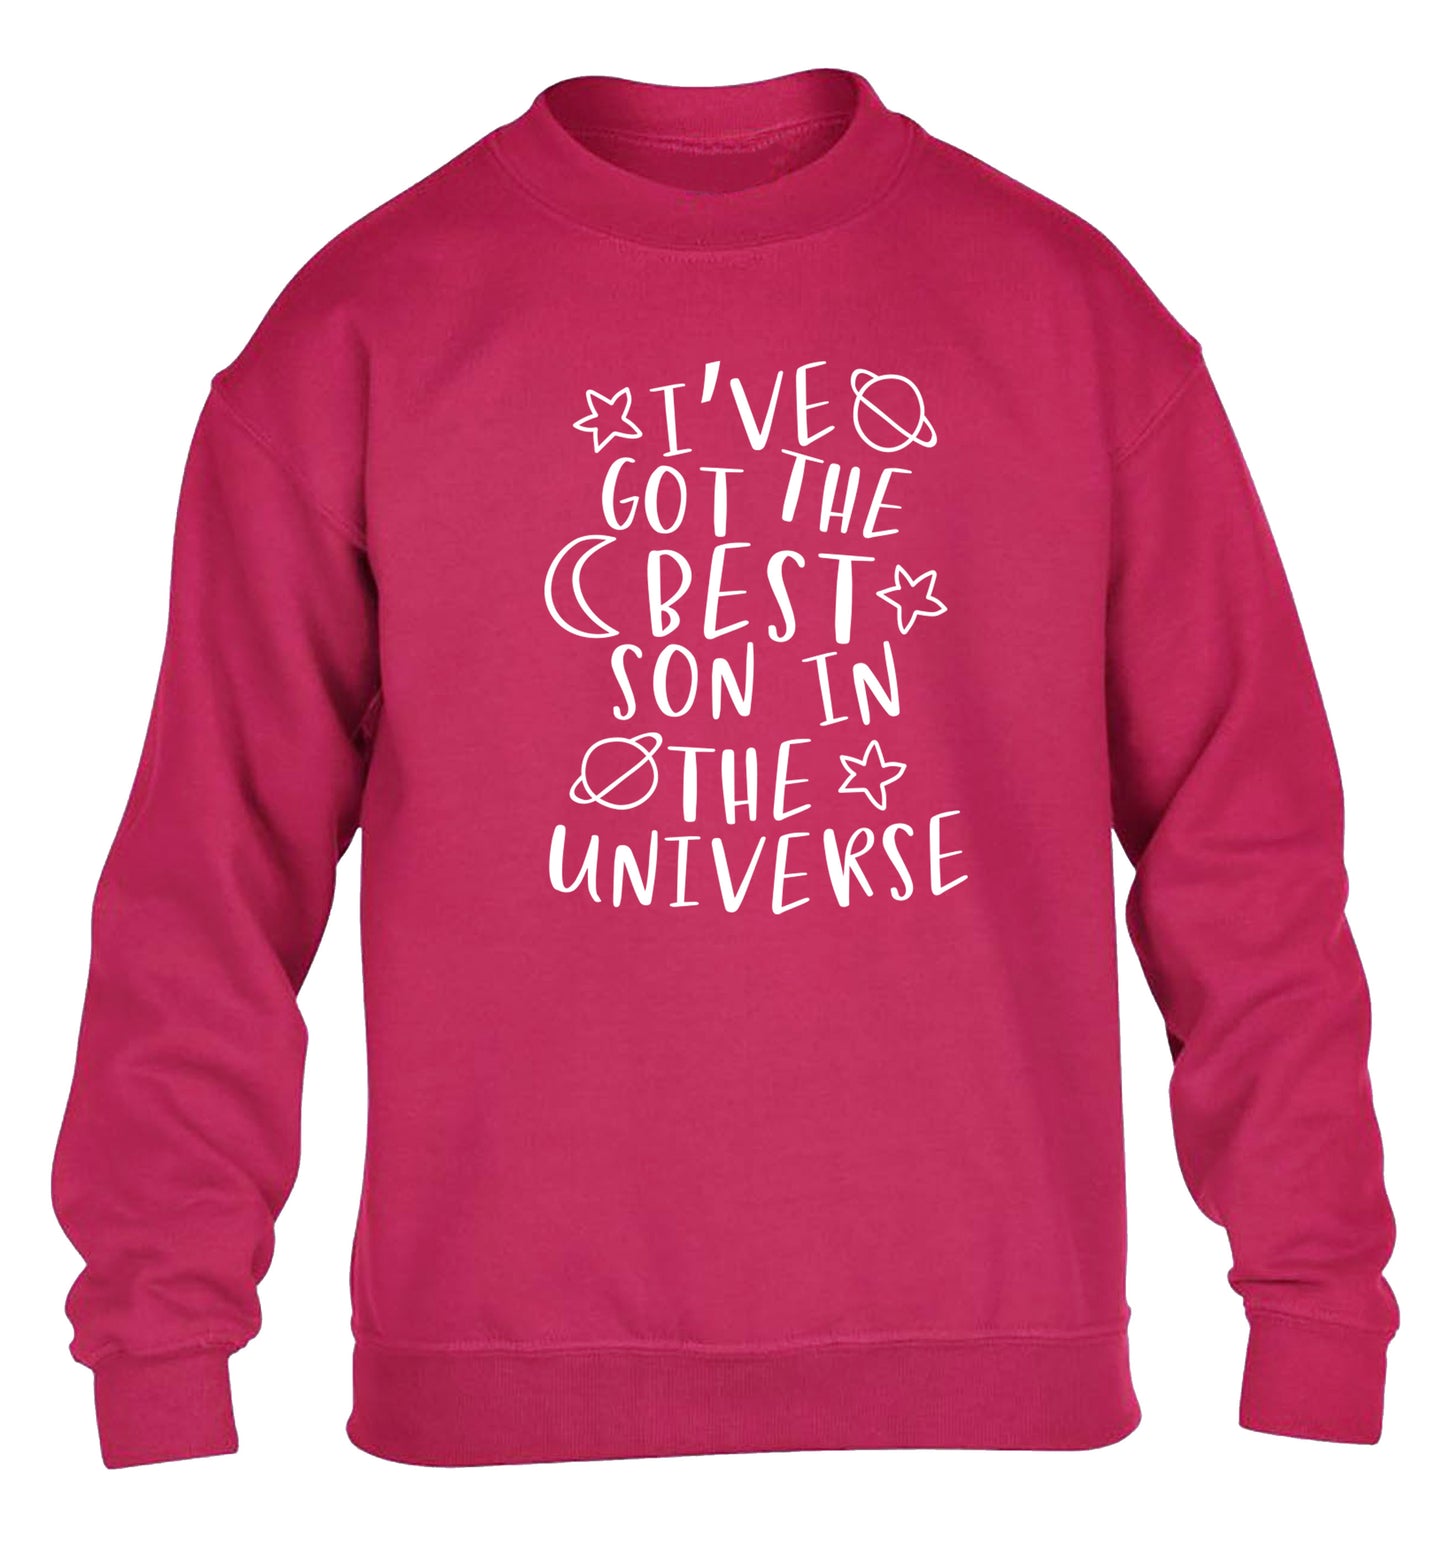 I've got the best son in the universe children's pink sweater 12-13 Years